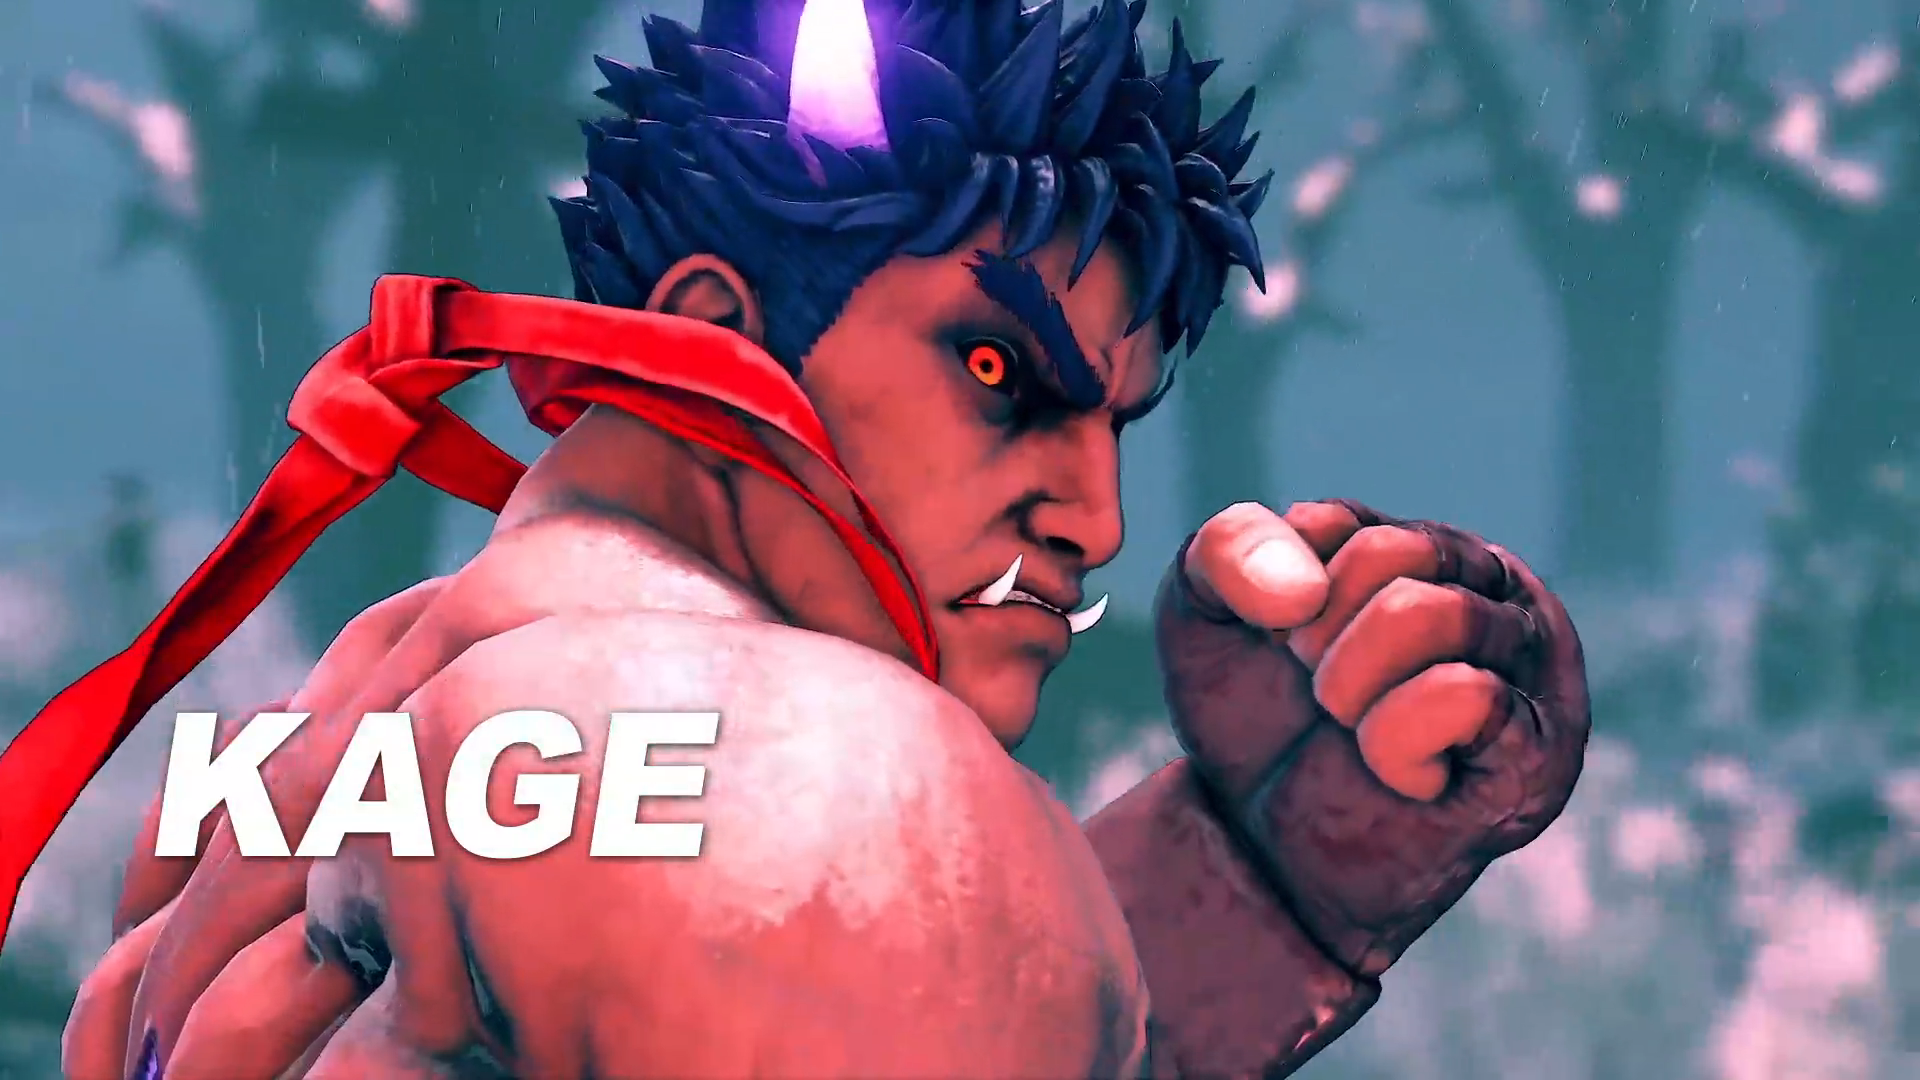 Akuma and 3 other DLC fighters have already been confirmed for